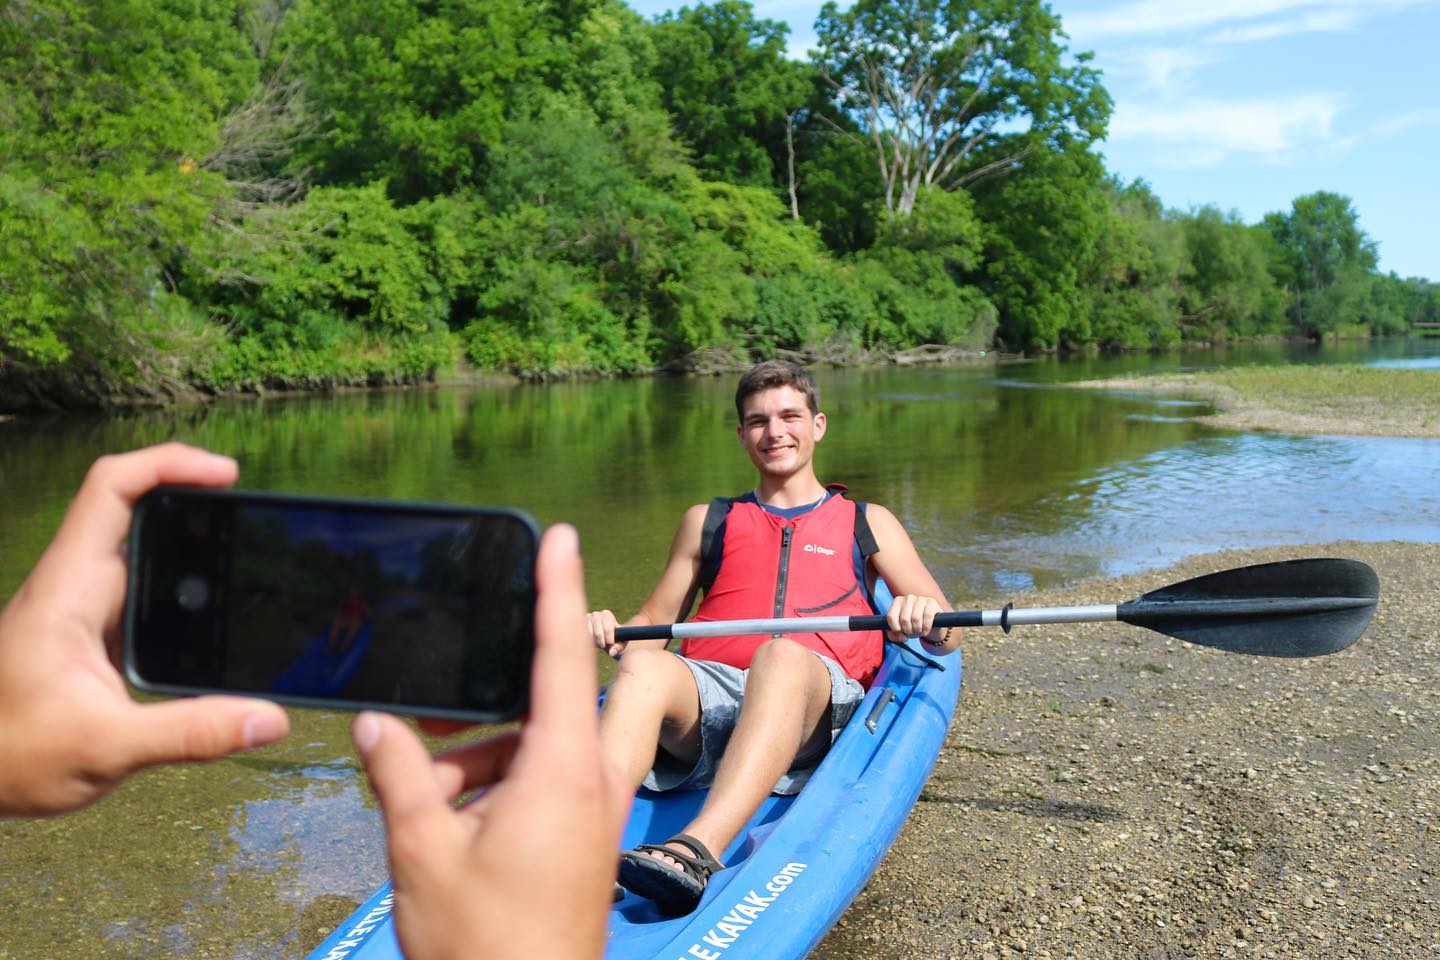 We want to see your kayaking photos! When you kayak with us, use the hashtag #napervillekayak or tag us for a chance to receive a kayak trip on us. See you out there!